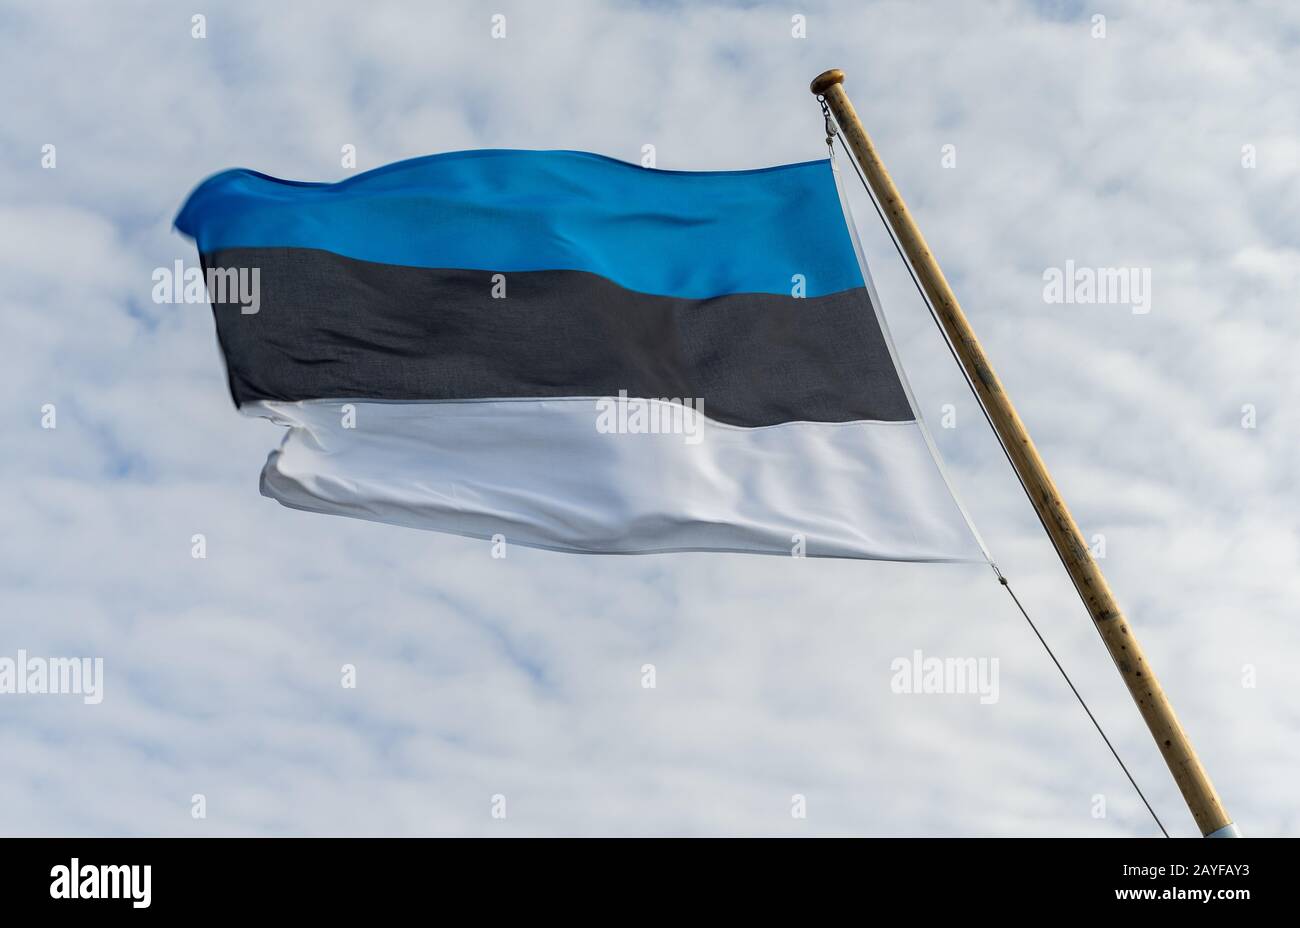 The developing white-black-blue flag of Estonia against the background of clouds in the sky. Stock Photo